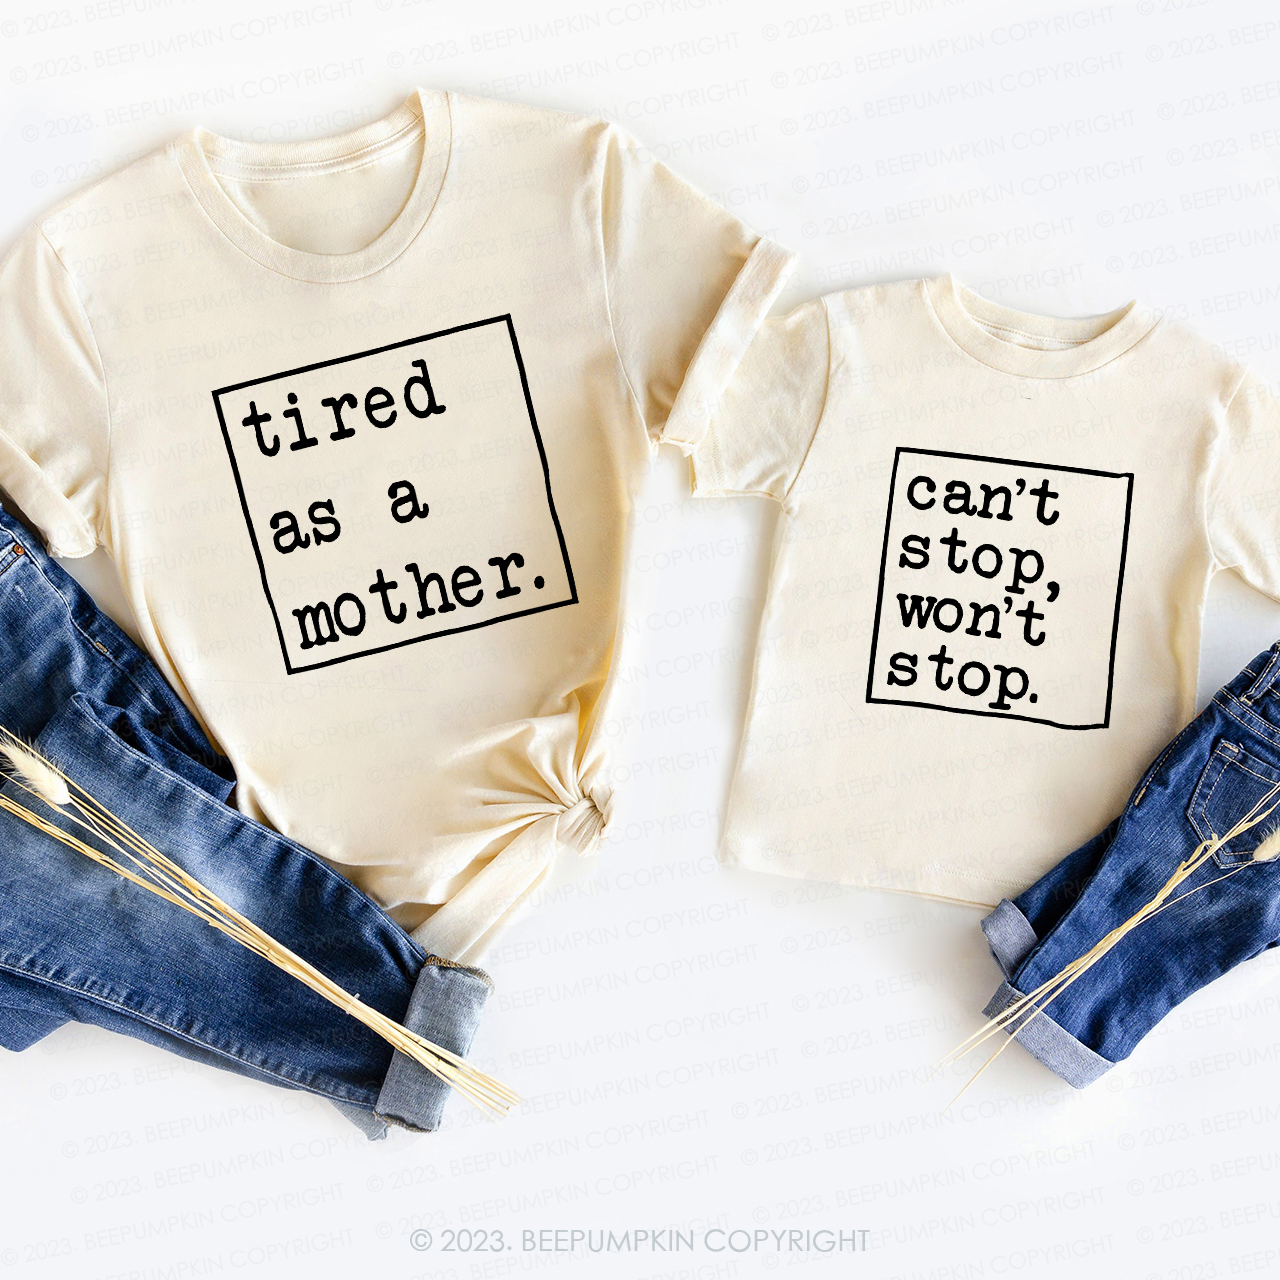 Tired As A Mother Can't Stop T-Shirts For Mom&Me